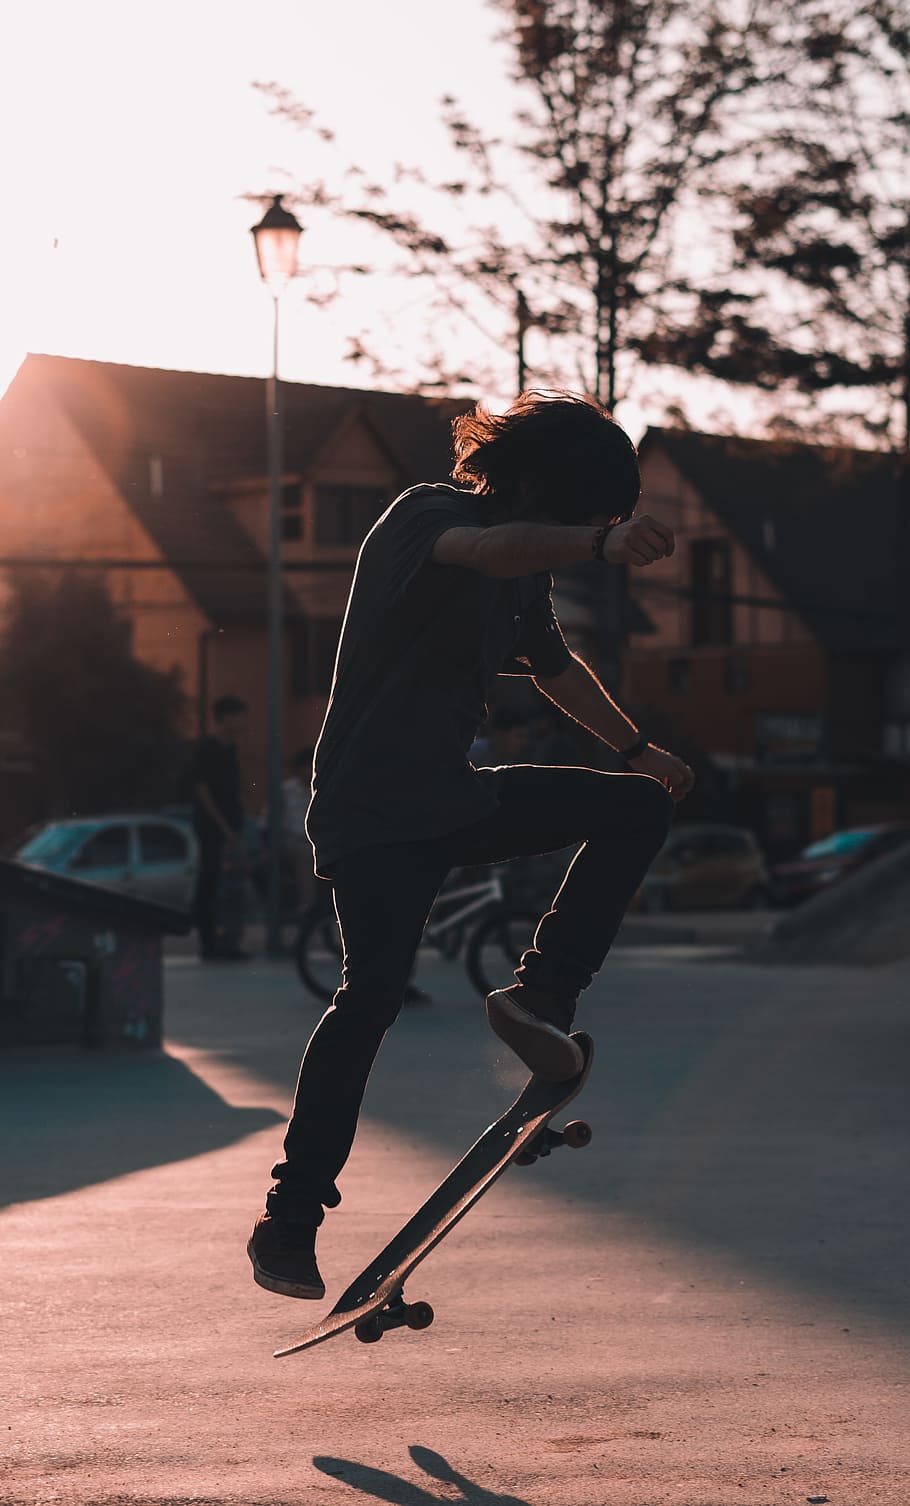 Aesthetic Skateboard Pictures Wallpapers